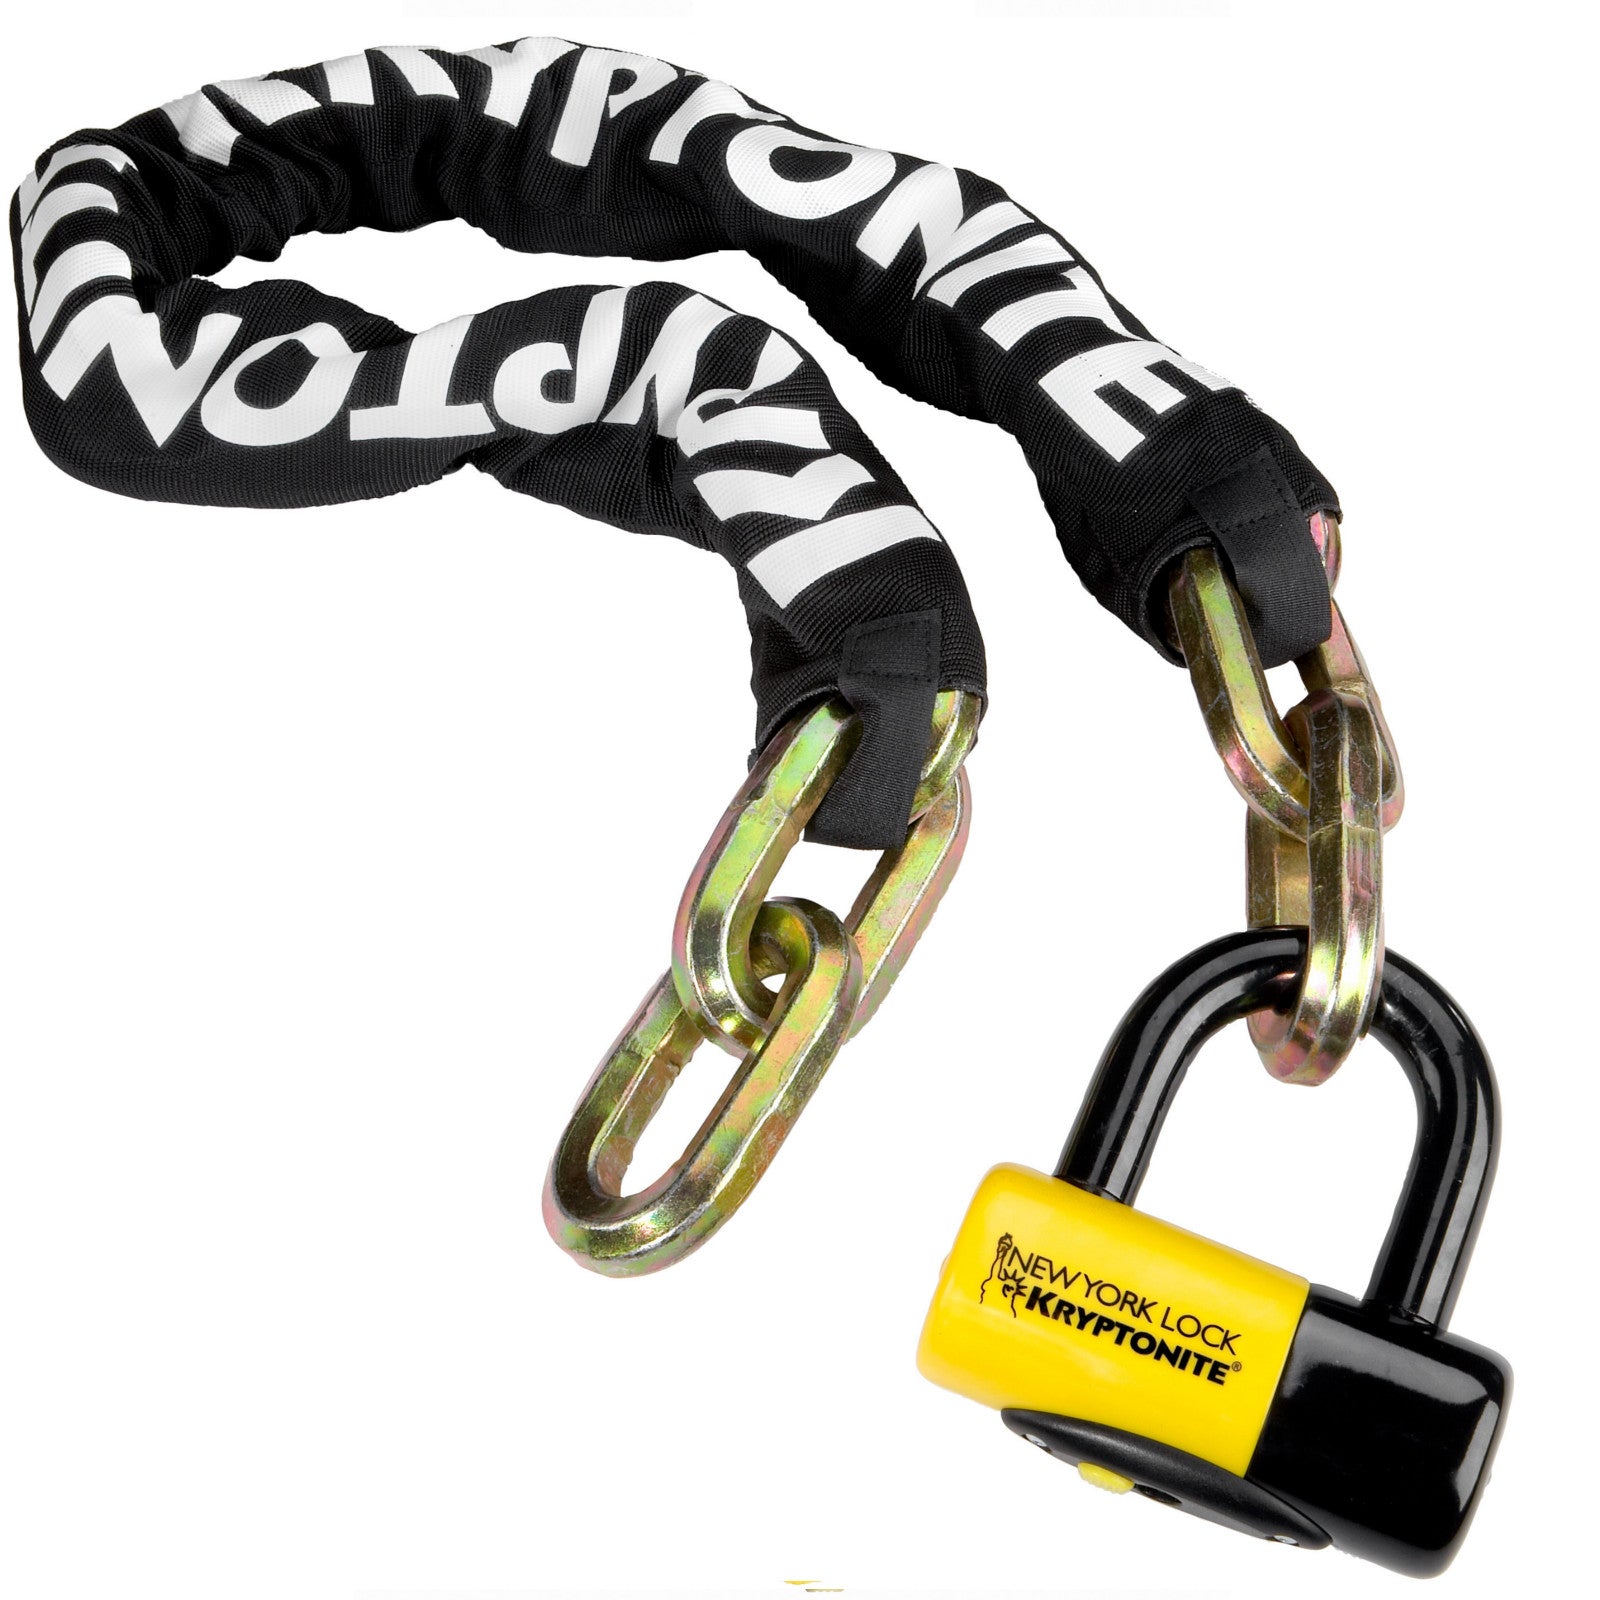 Kryptonite New York Fahgettaboudit 1410 14mm 100cm Bike Chain Lock With NY Shackle